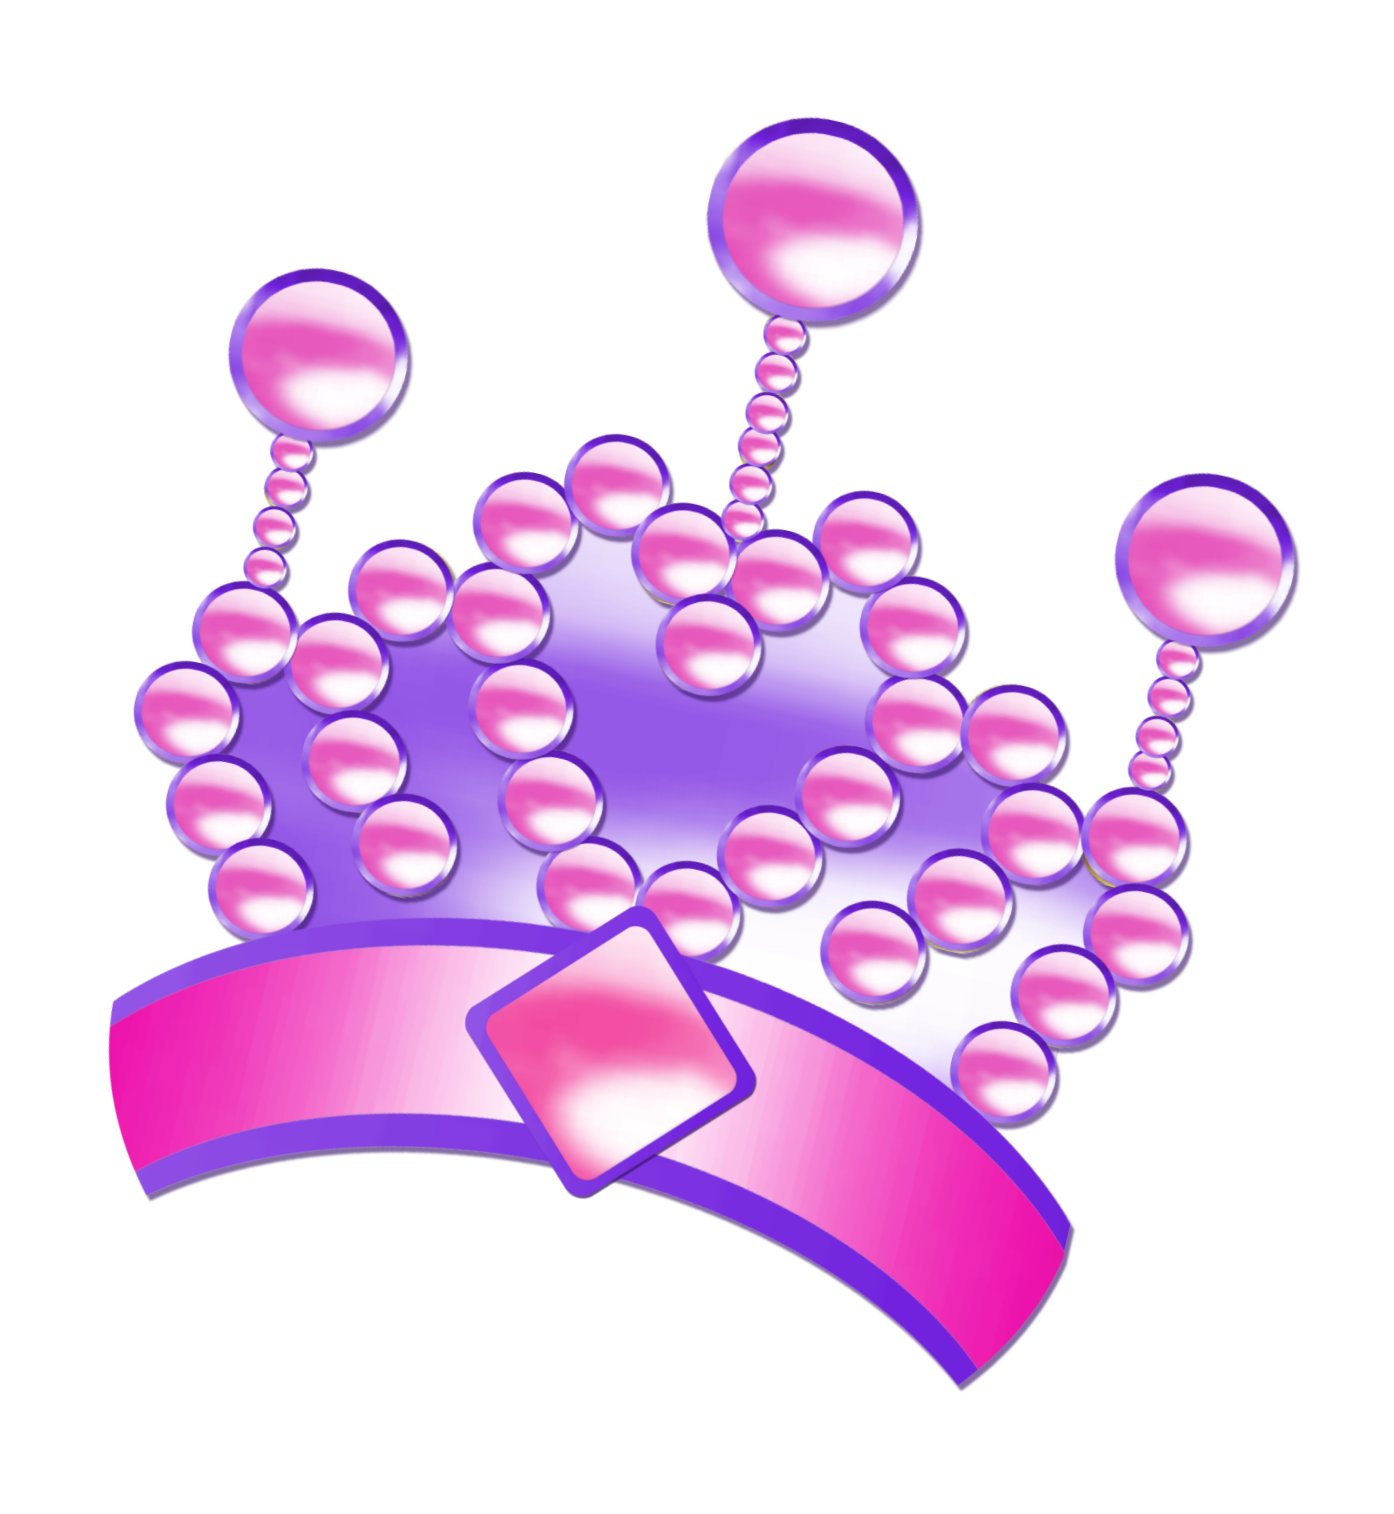 clipart of princess crown - photo #37